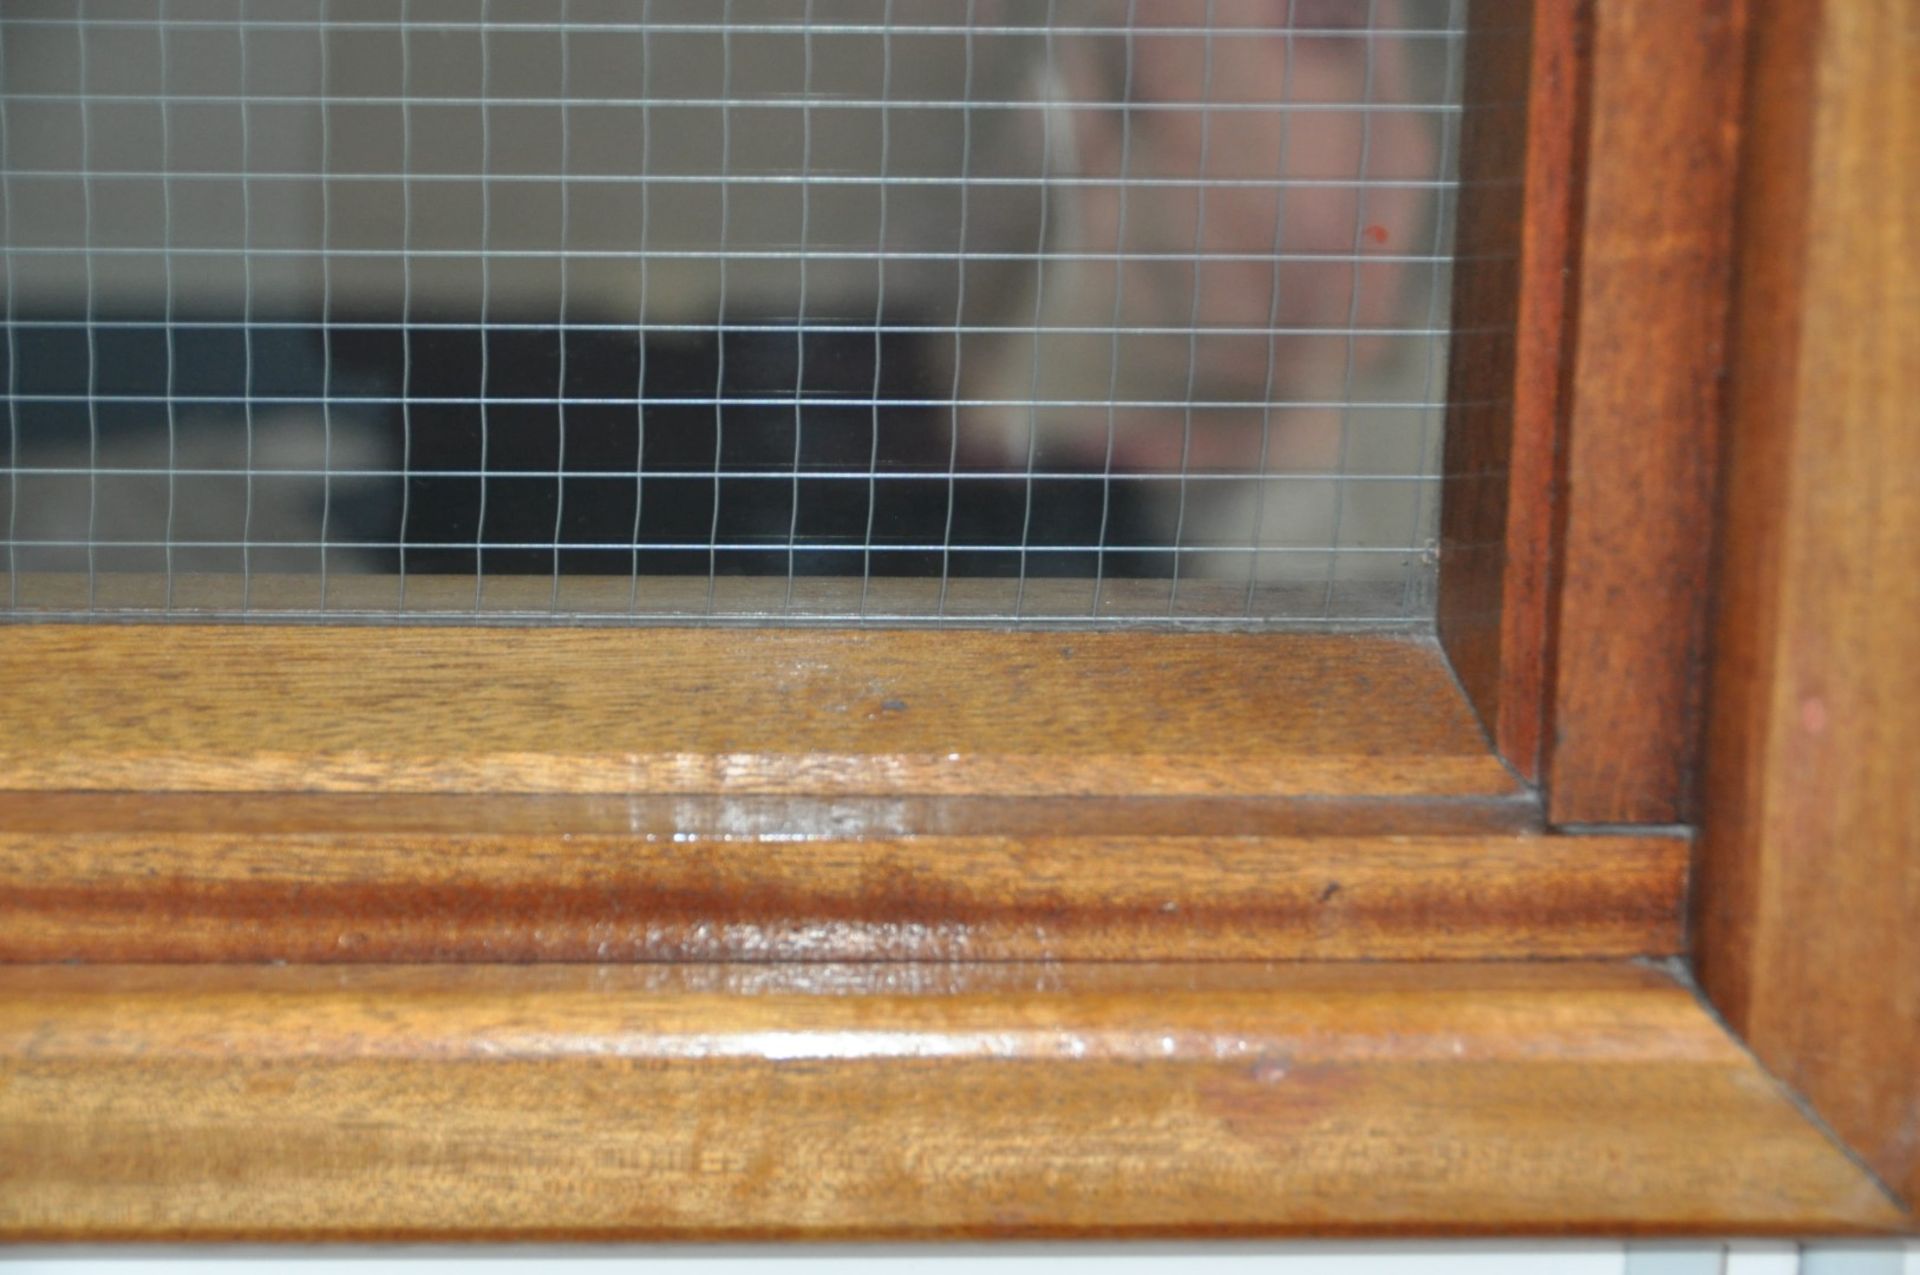 1 x Huge Vintage Oak Window Frame With Wire Mesh Security Glass - Size: 287 x 96 cms - Approx 9 Feet - Image 3 of 3